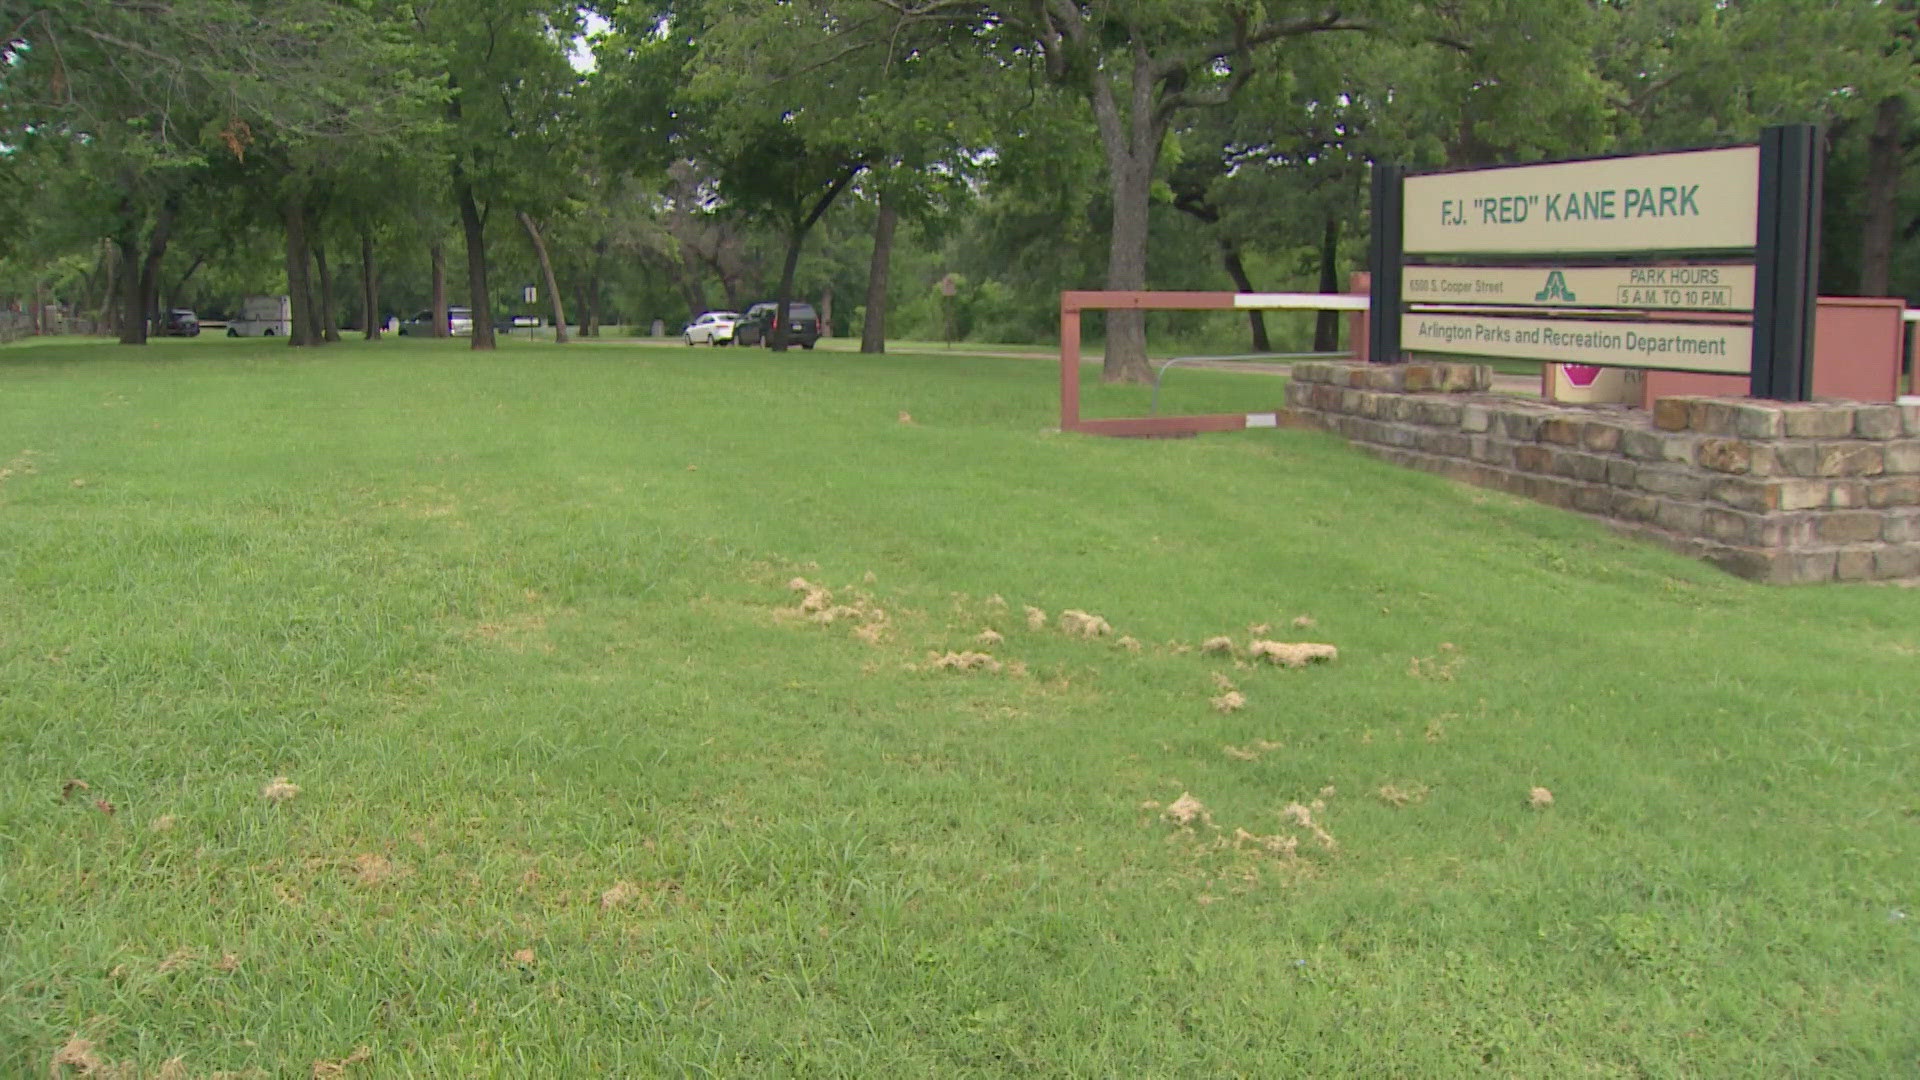 The man was fatally shot by an Arlington police officer after he shot and injured a woman at F.J. “Red” Kane Park in Arlington last week, police say.